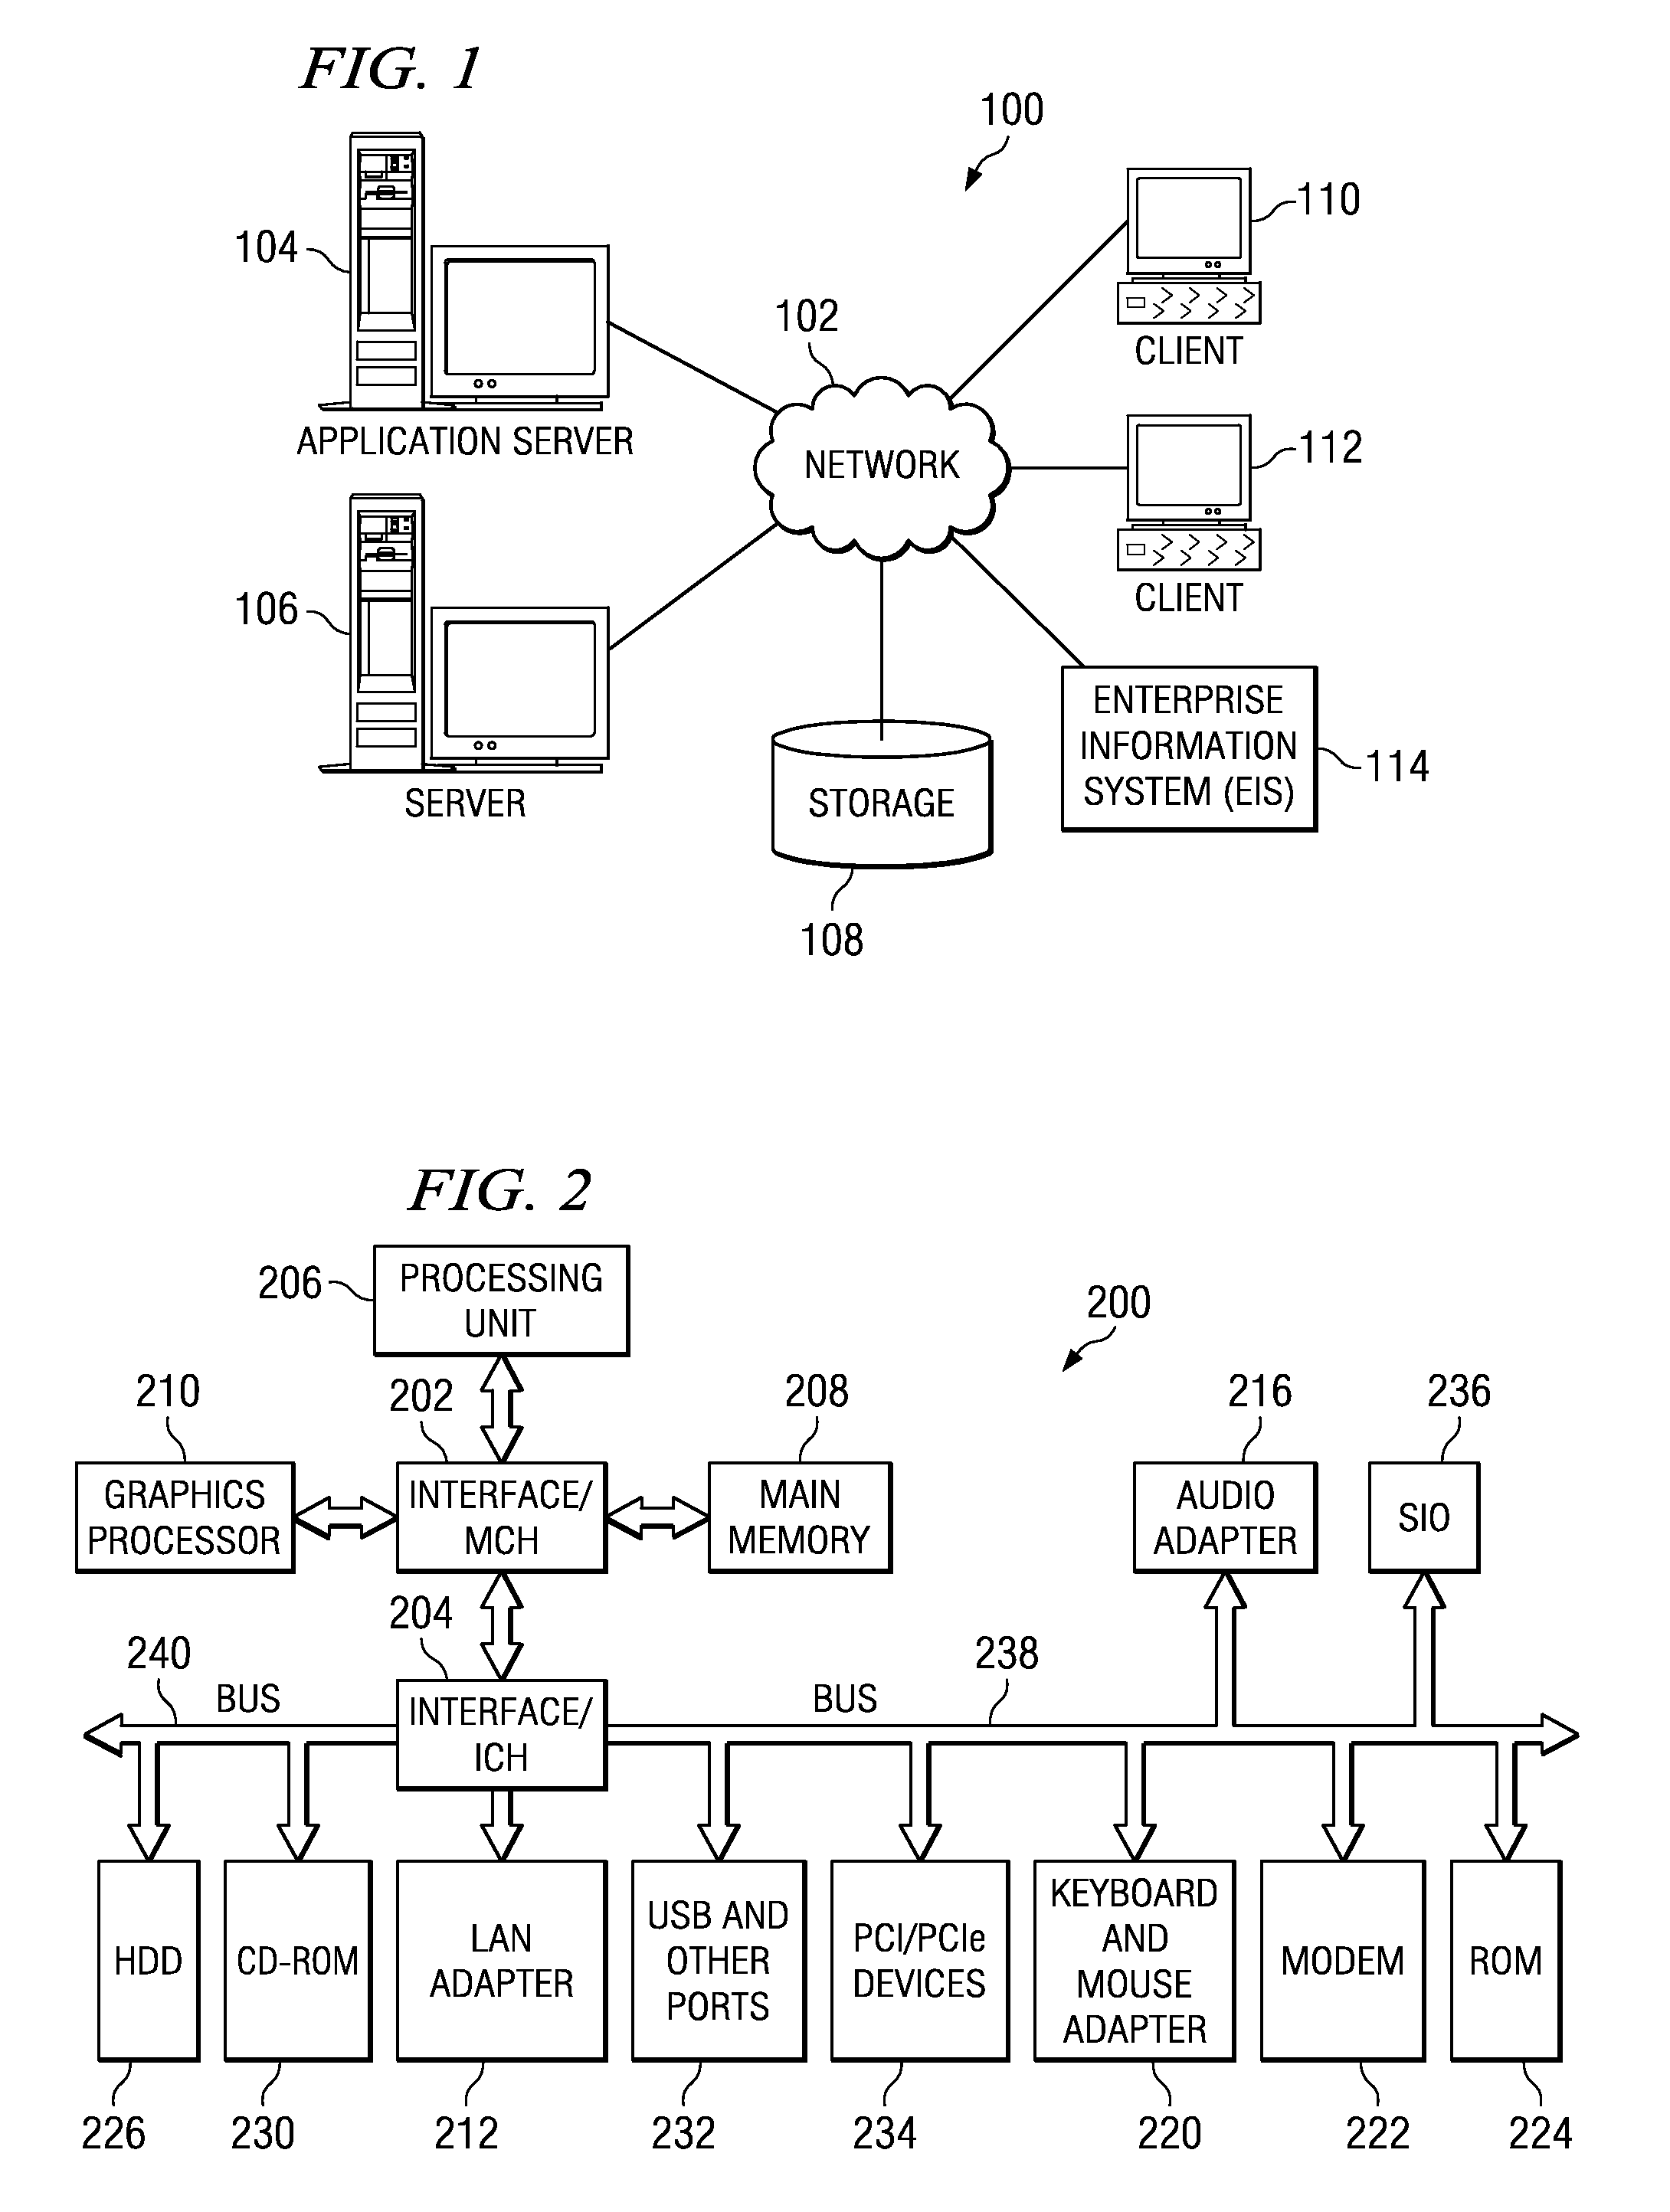 Extensible mechanism for automatically migrating resource adapter components in a development environment